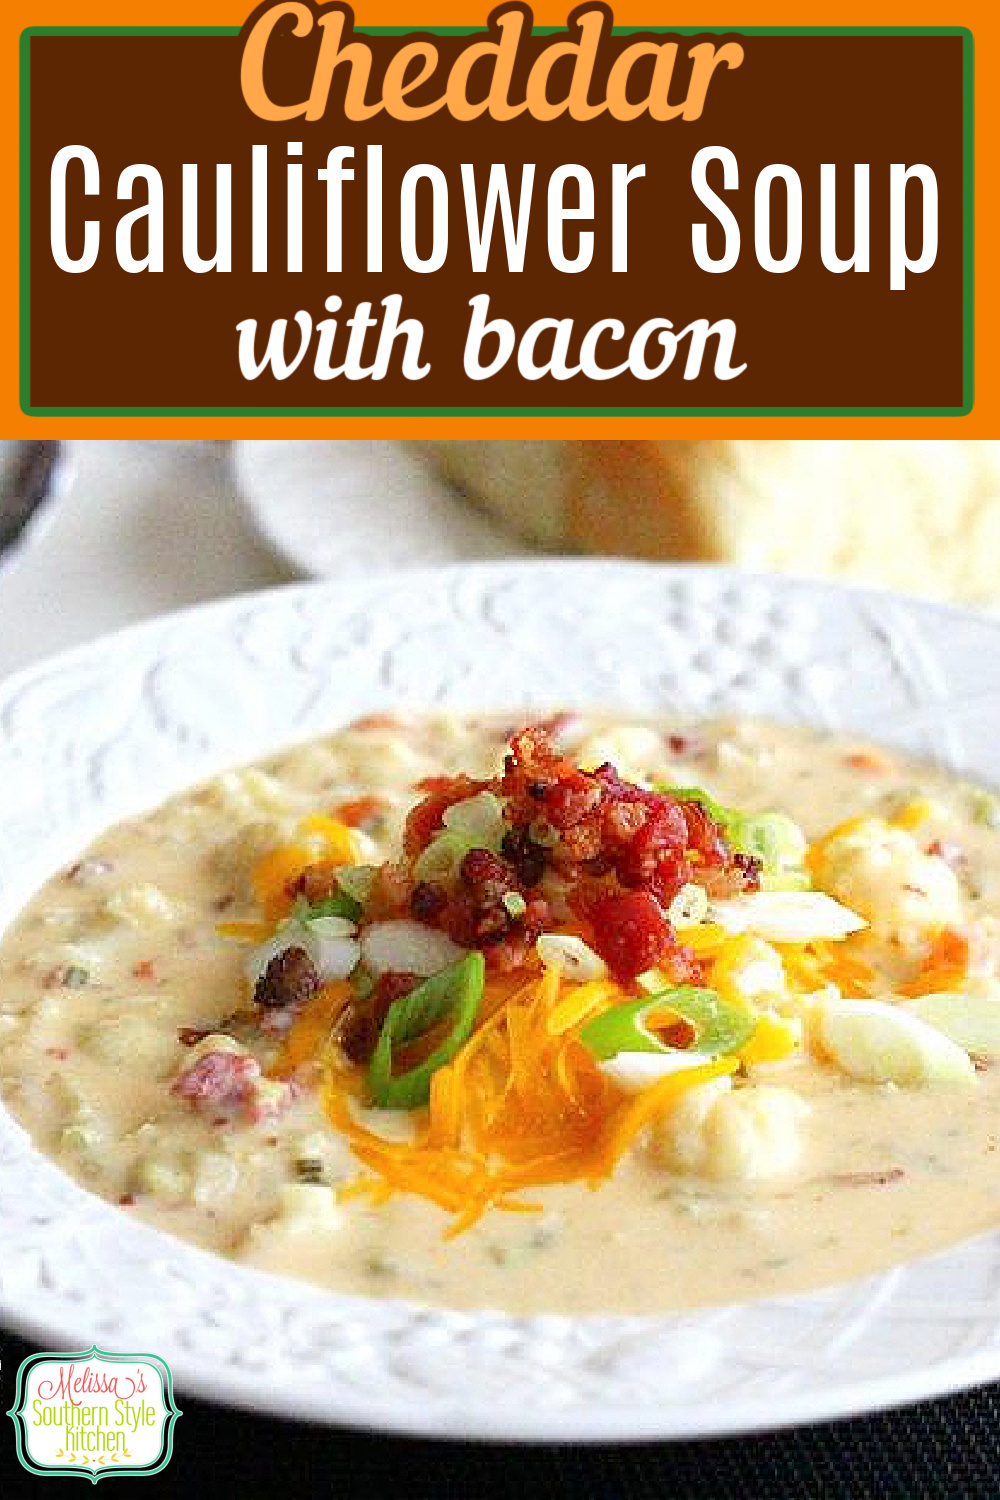 This dreamy Cheddar Cauliflower Soup with Bacon is a delicious lower carb riff on loaded potato soup #cheddarsoup #cauliflower #caulifowerrecipes #lowcarb #cauliflowersoup #dinnerideas #bacon #souprecipes #dinner #lunch #southernfood #southernrecipes via @melissasssk